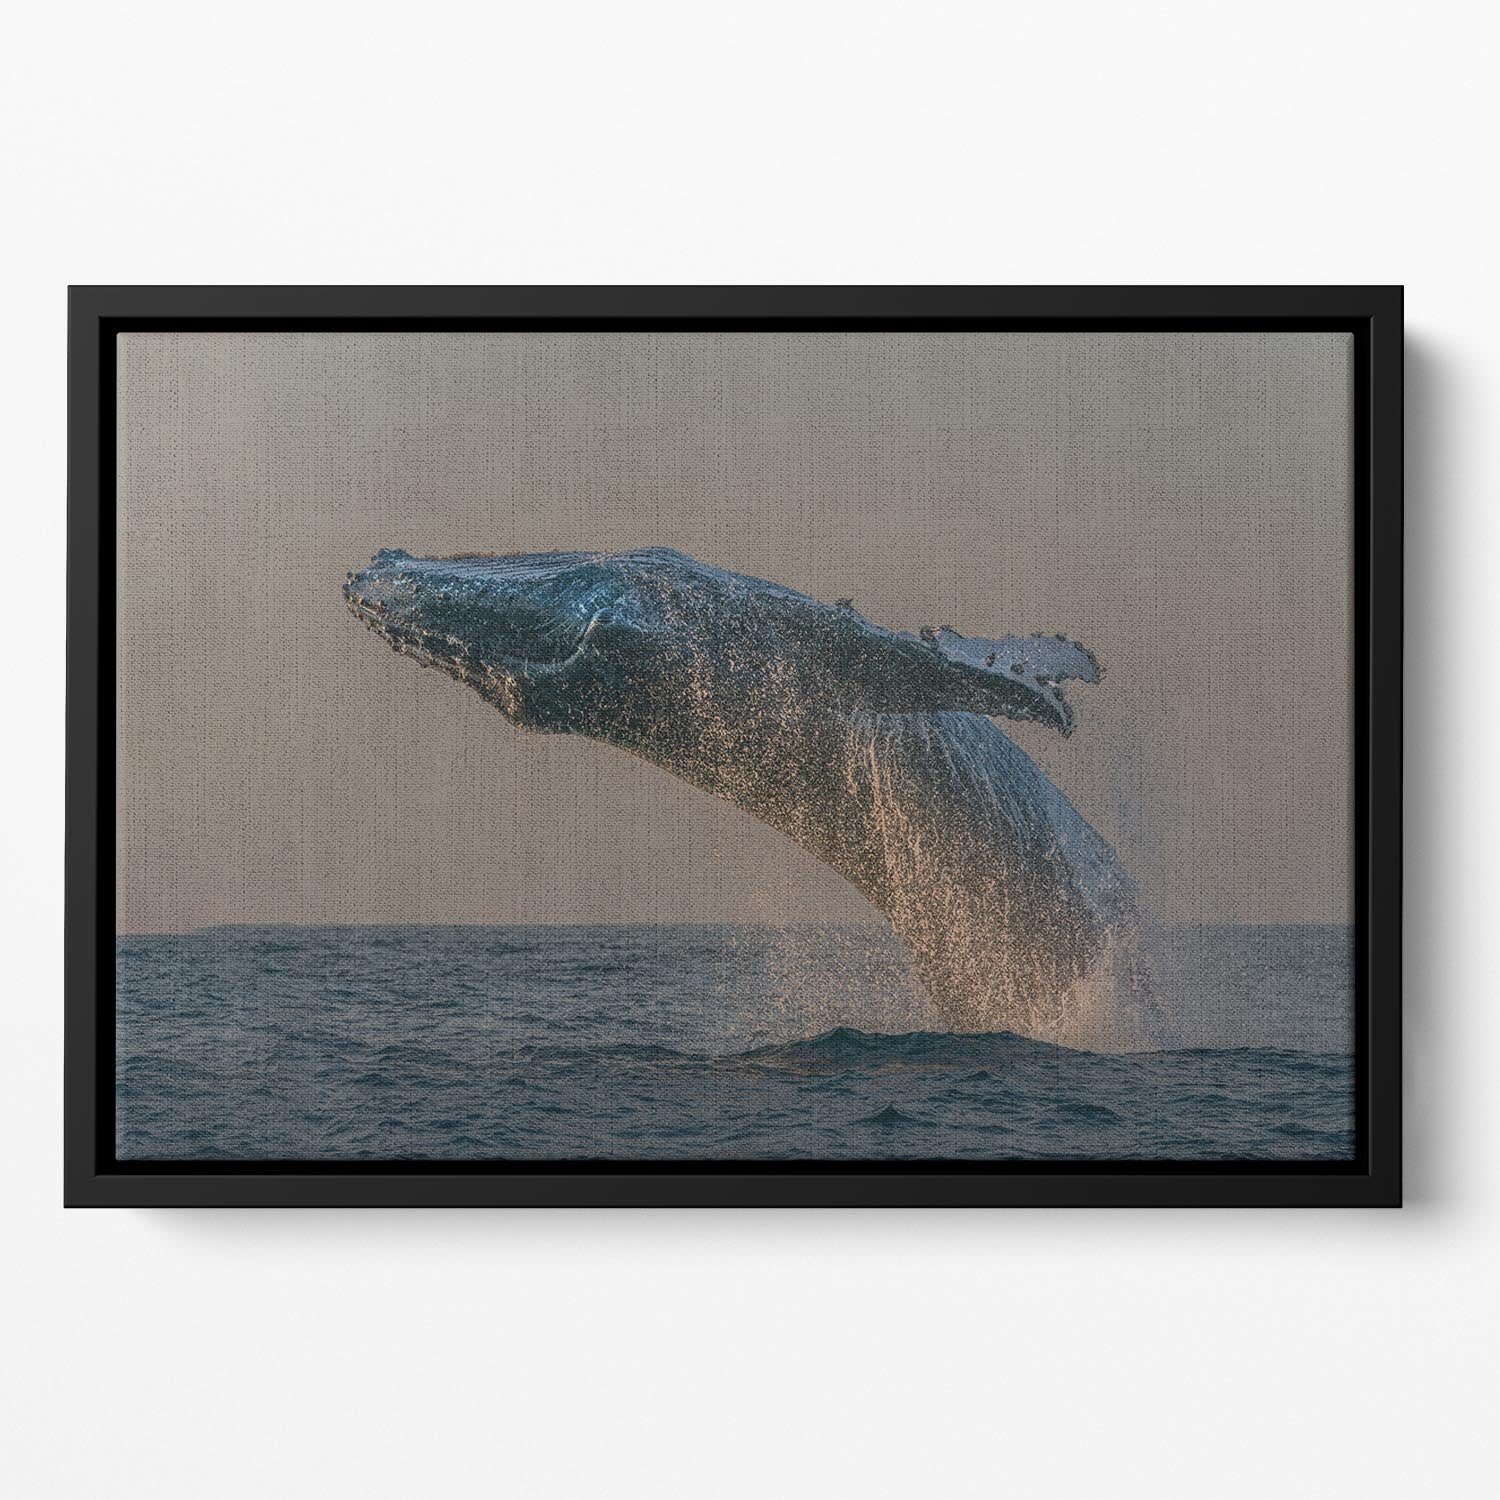 Whale Fliiping Out The Ocean Floating Framed Canvas - Canvas Art Rocks - 2